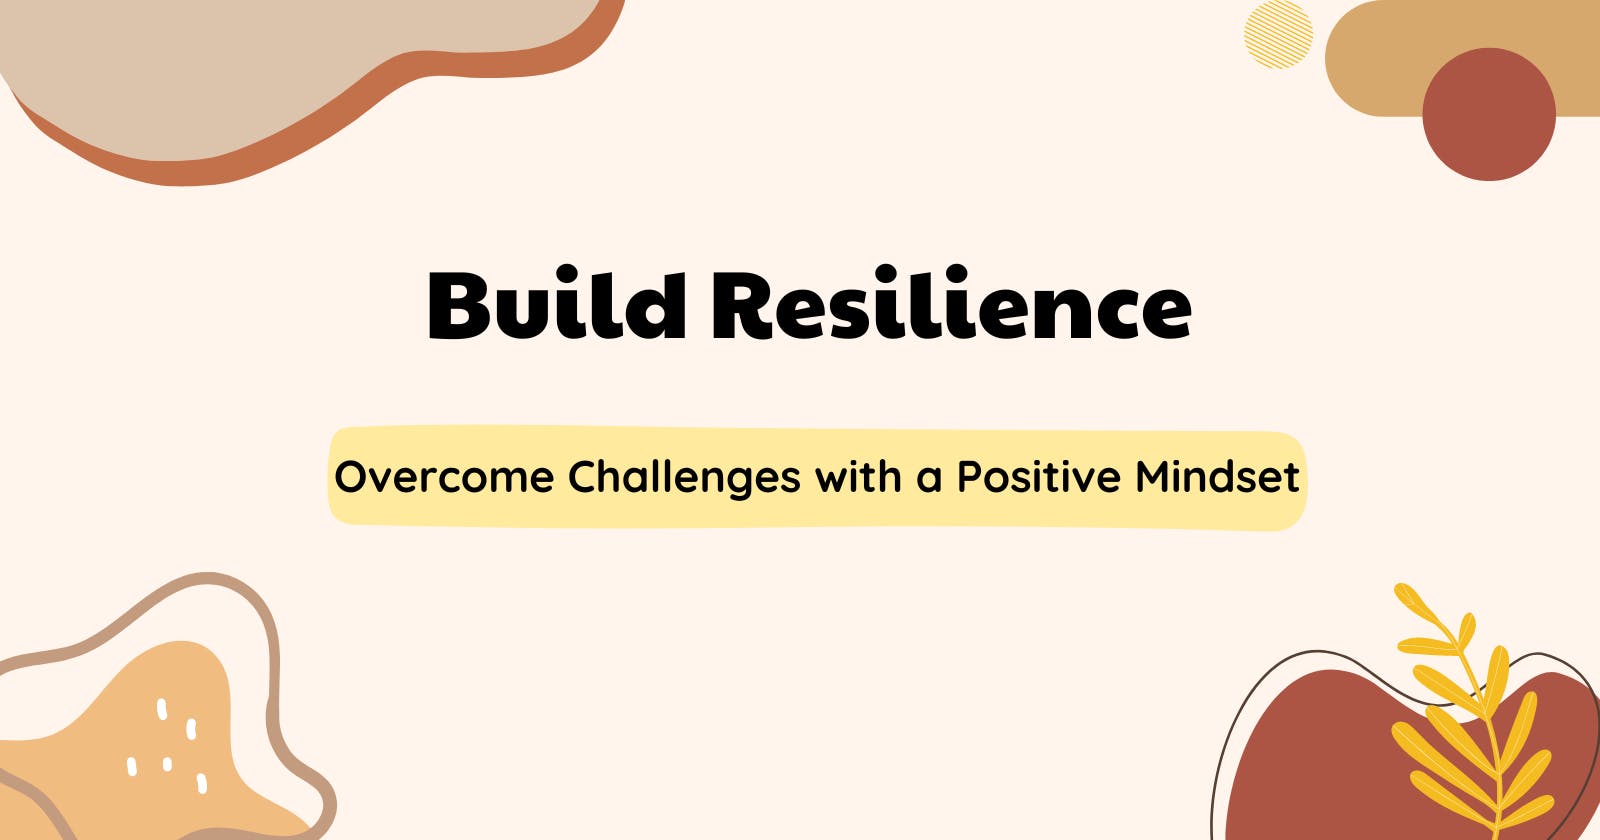 Strategies to Build Resilience and Overcome Challenges with a Positive Mindset 🌟